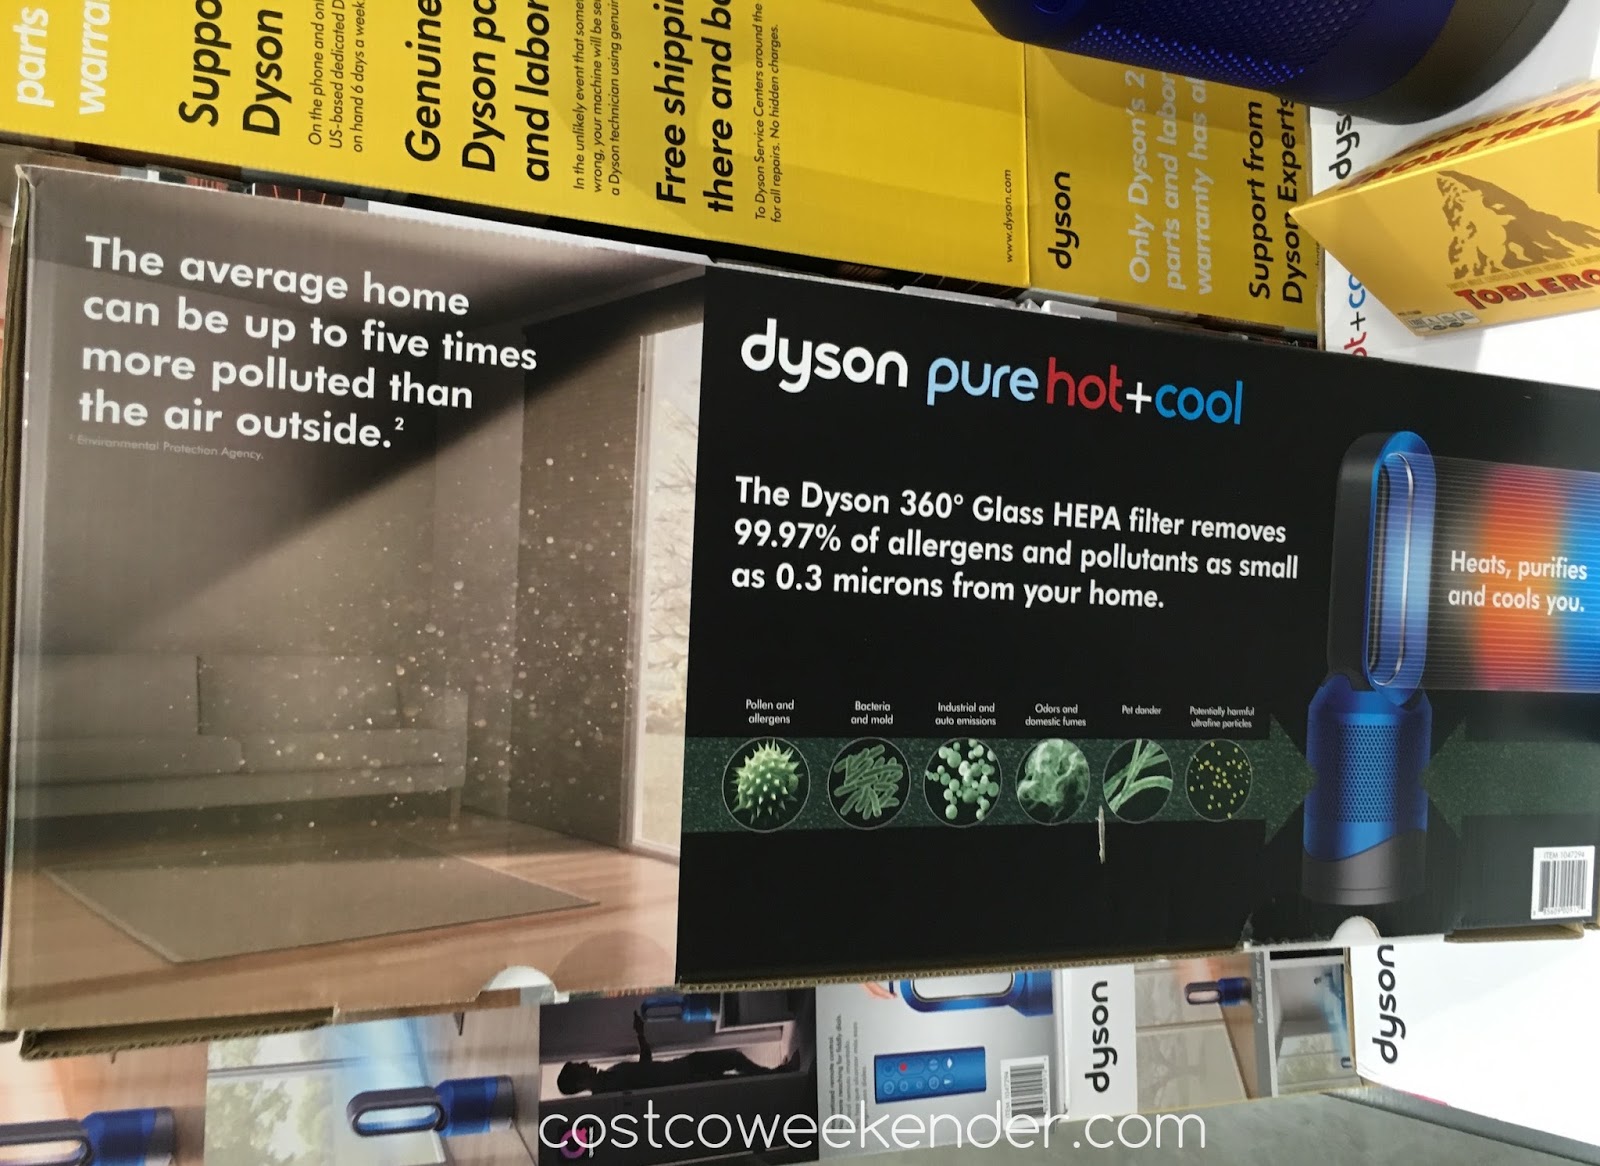 Dyson Pure Hot + Cool Link Purifier Costco Weekender